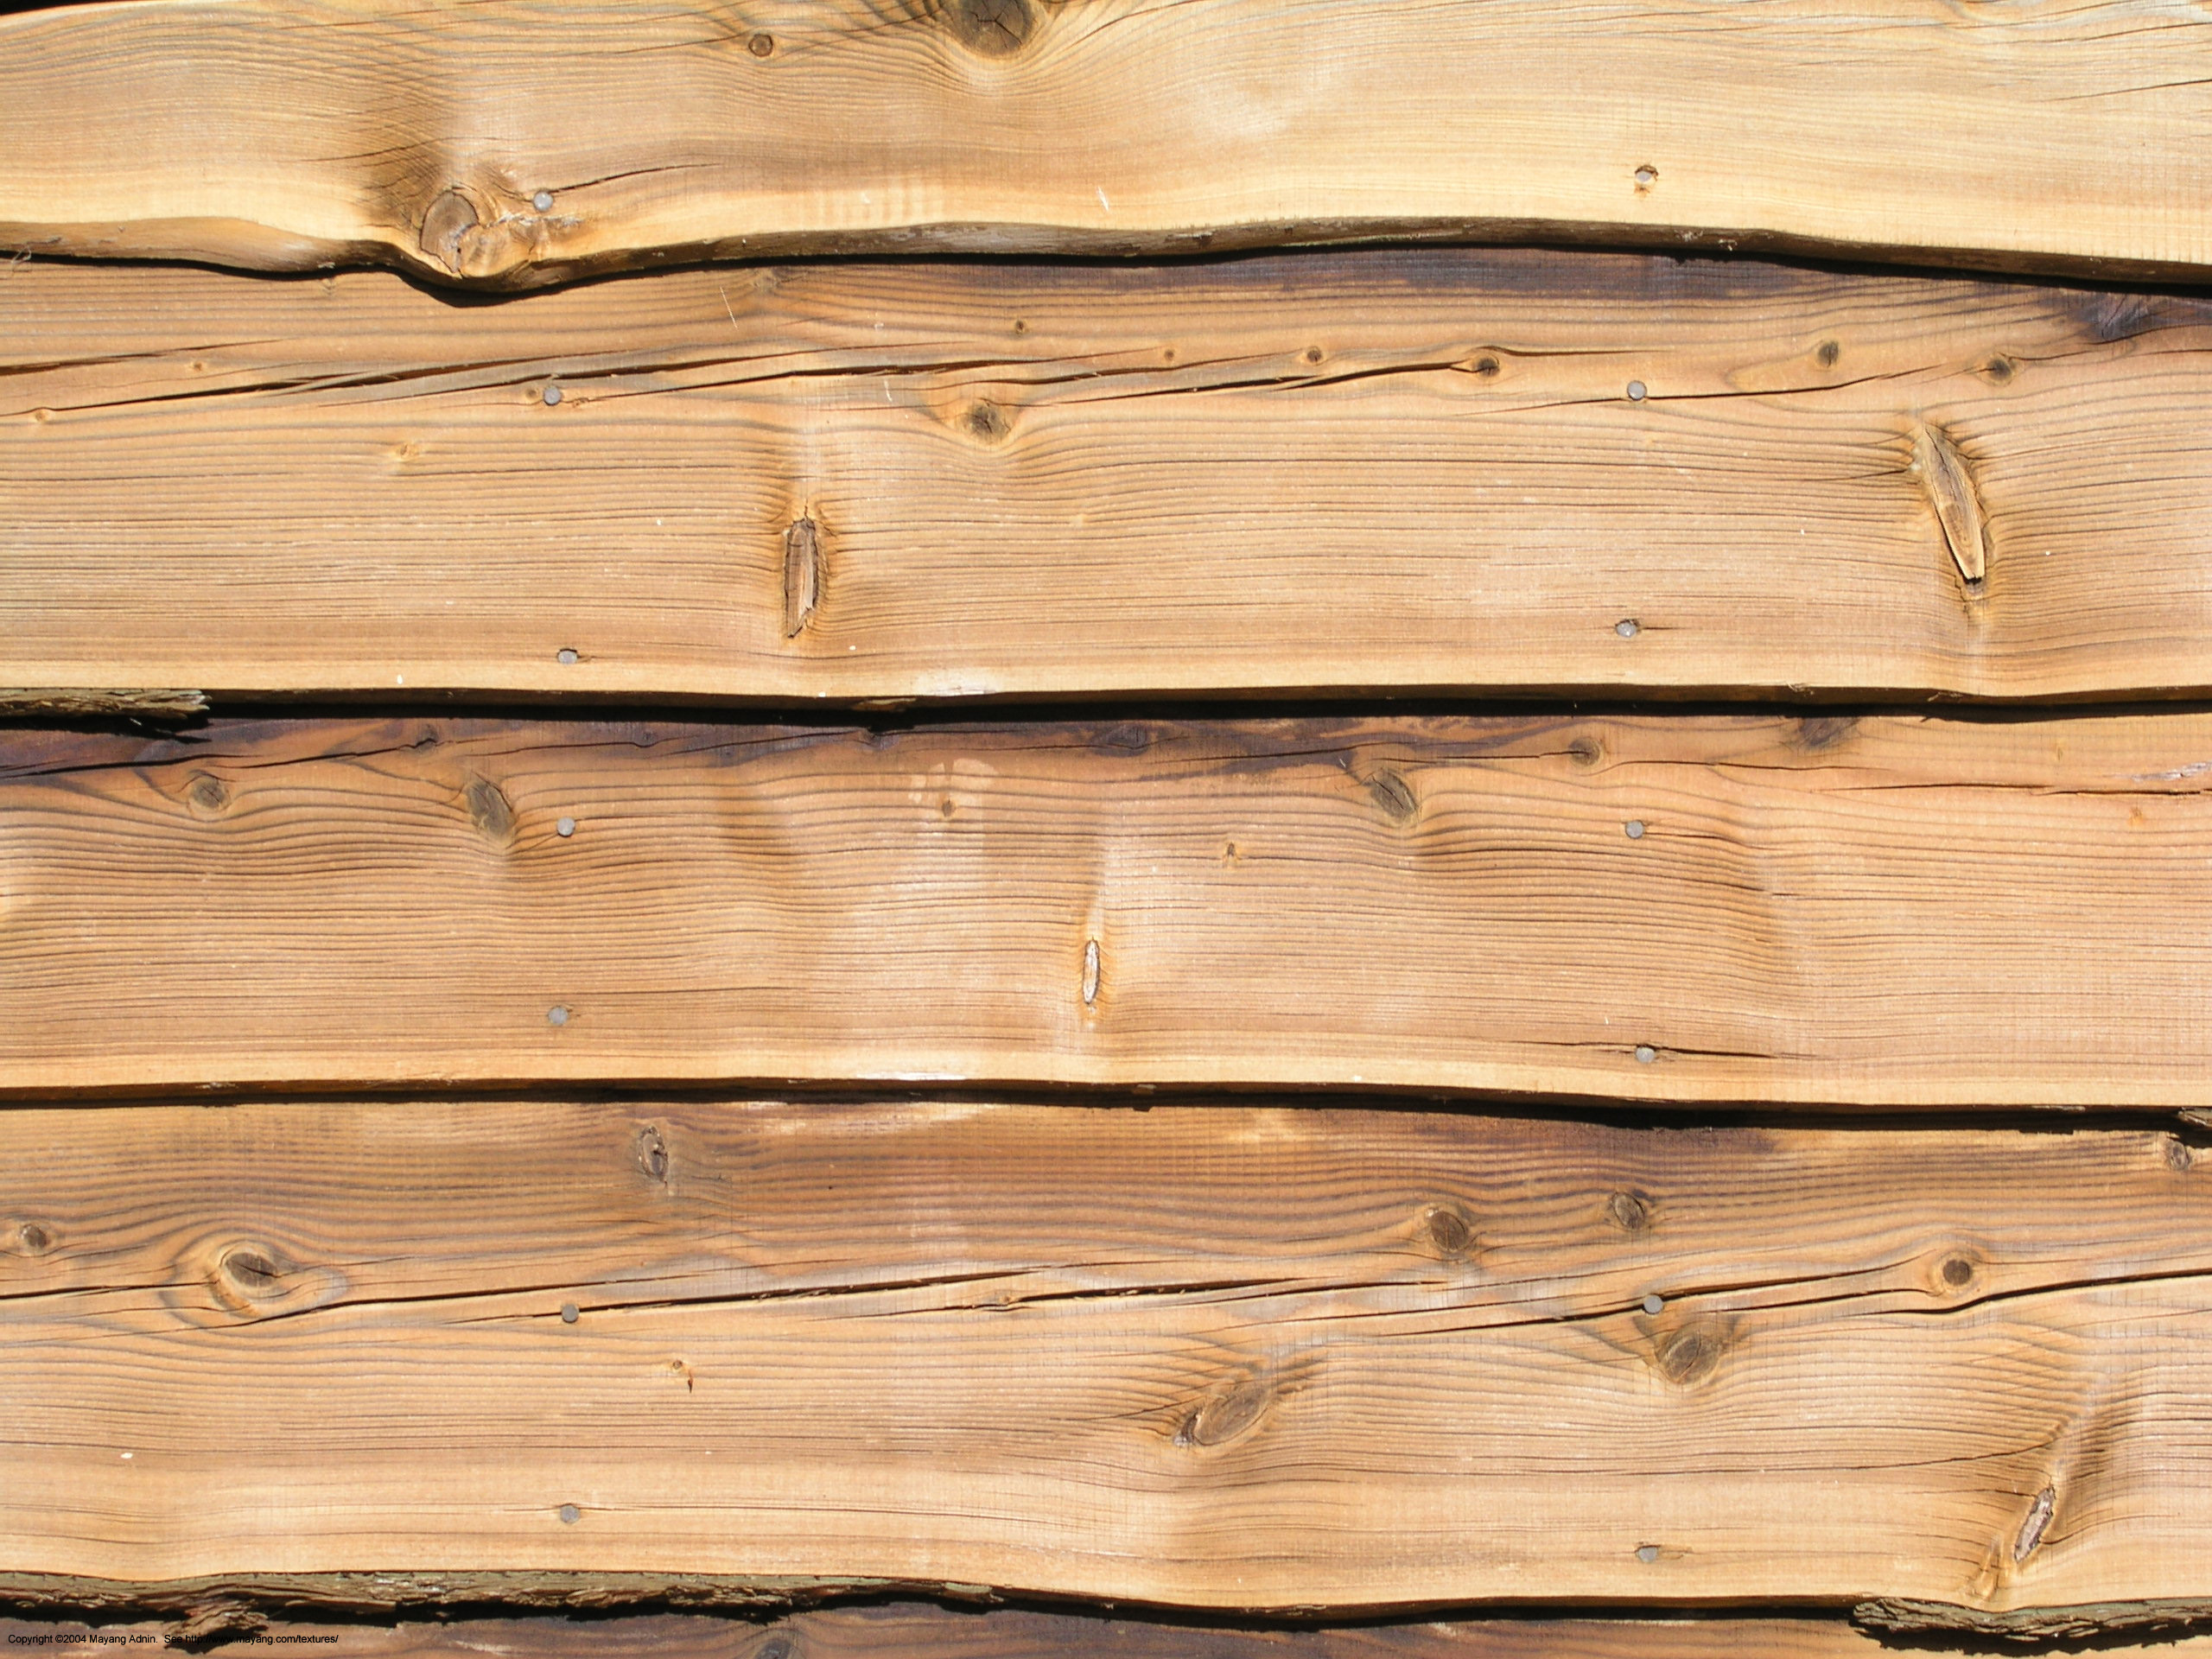 wood background wallpaper, download photo, background, texture, tree wood, download photo, planking